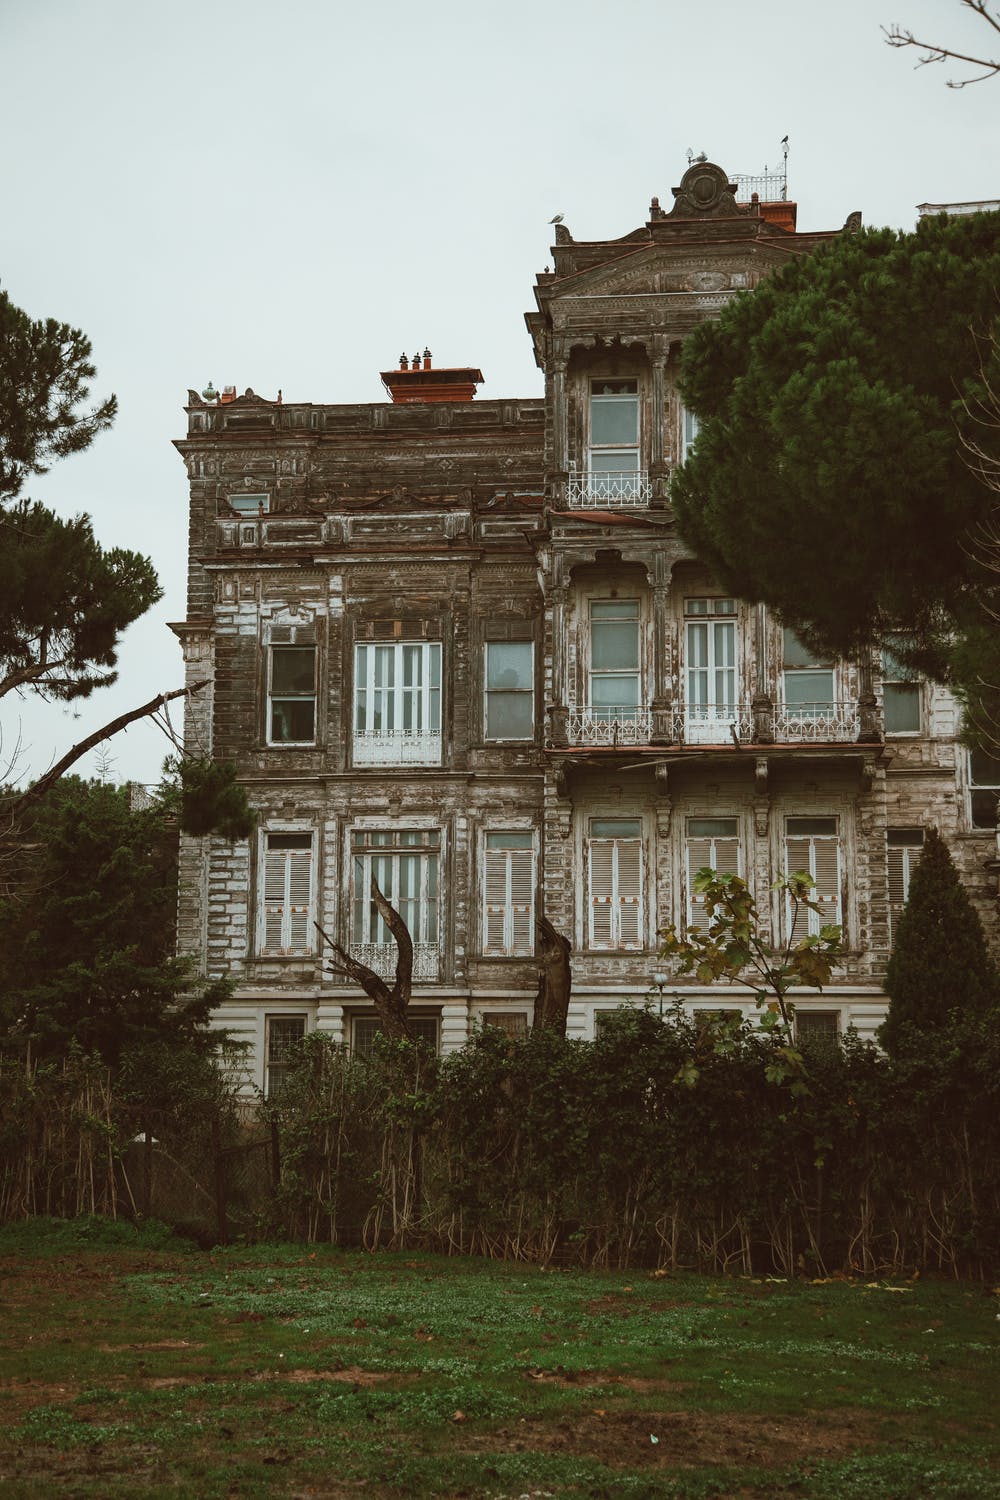 An old abandoned mansion